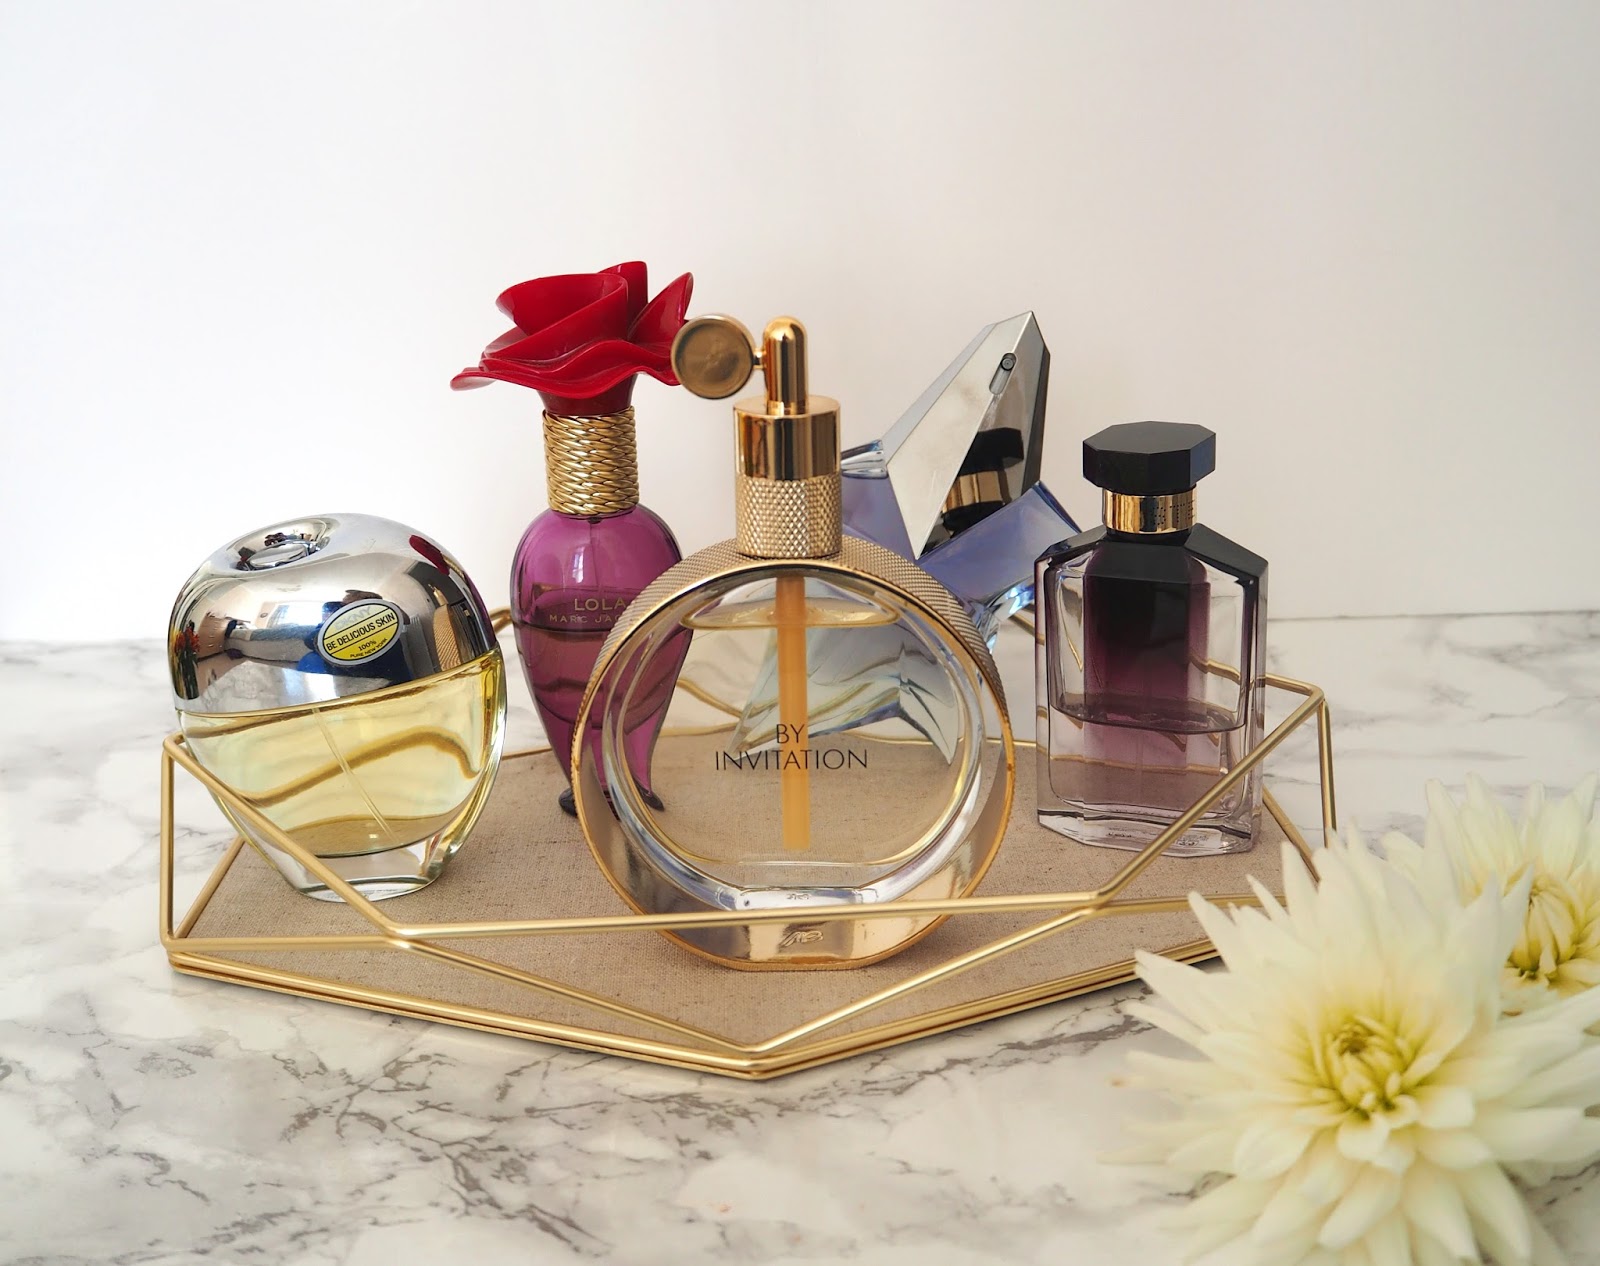 By Invitation by Michael Buble Perfume Review, Beauty Blogger, Katie Kirk Loves